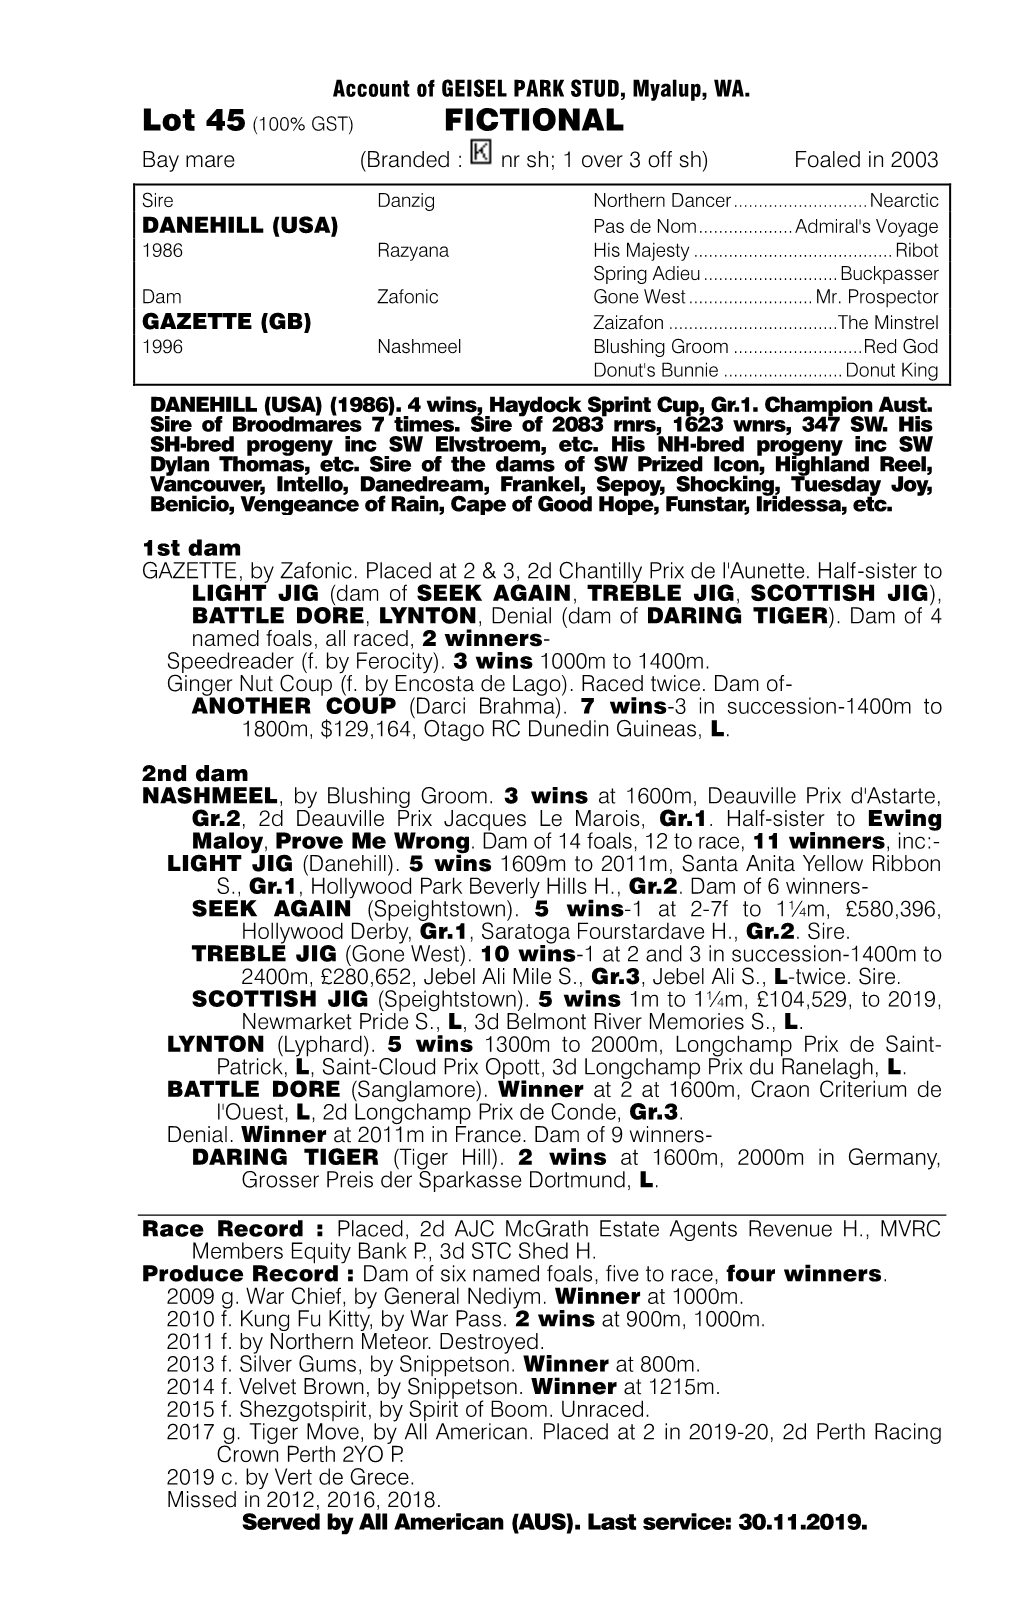 FICTIONAL Bay Mare (Branded : Nr Sh; 1 Over 3 Off Sh) Foaled in 2003